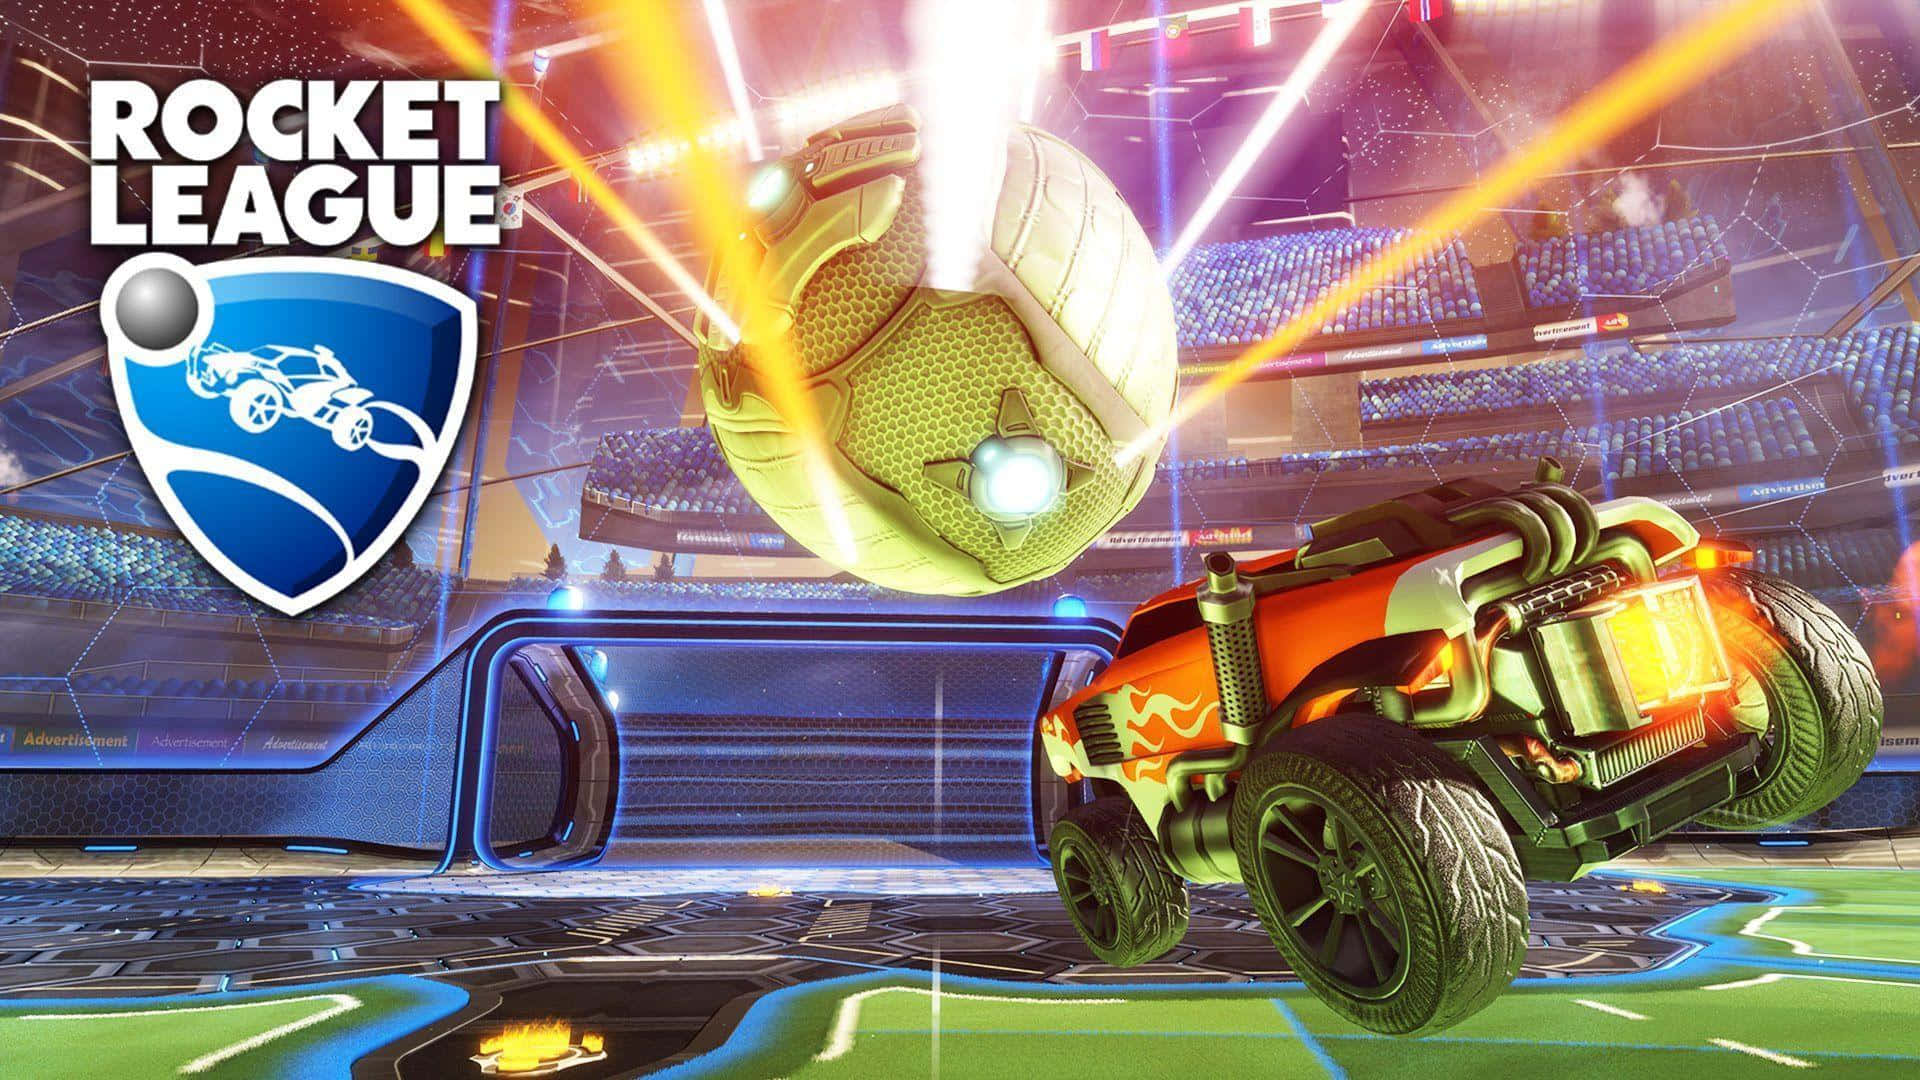 Rule the Rocket League in style with this great 1080p background